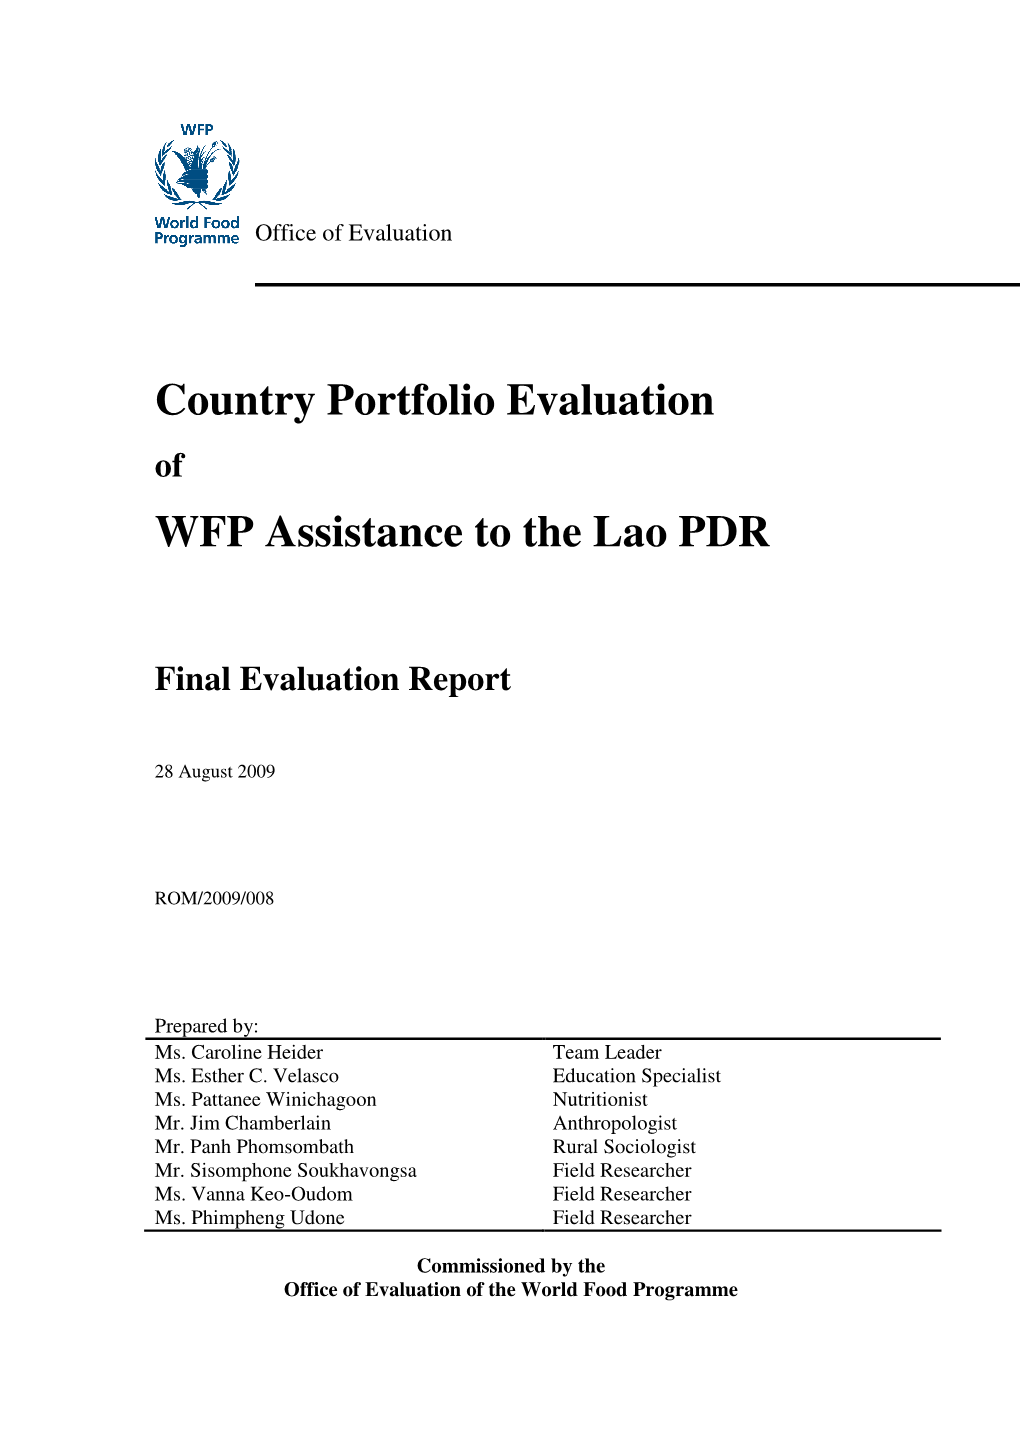 Country Portfolio Evaluation WFP Assistance to the Lao